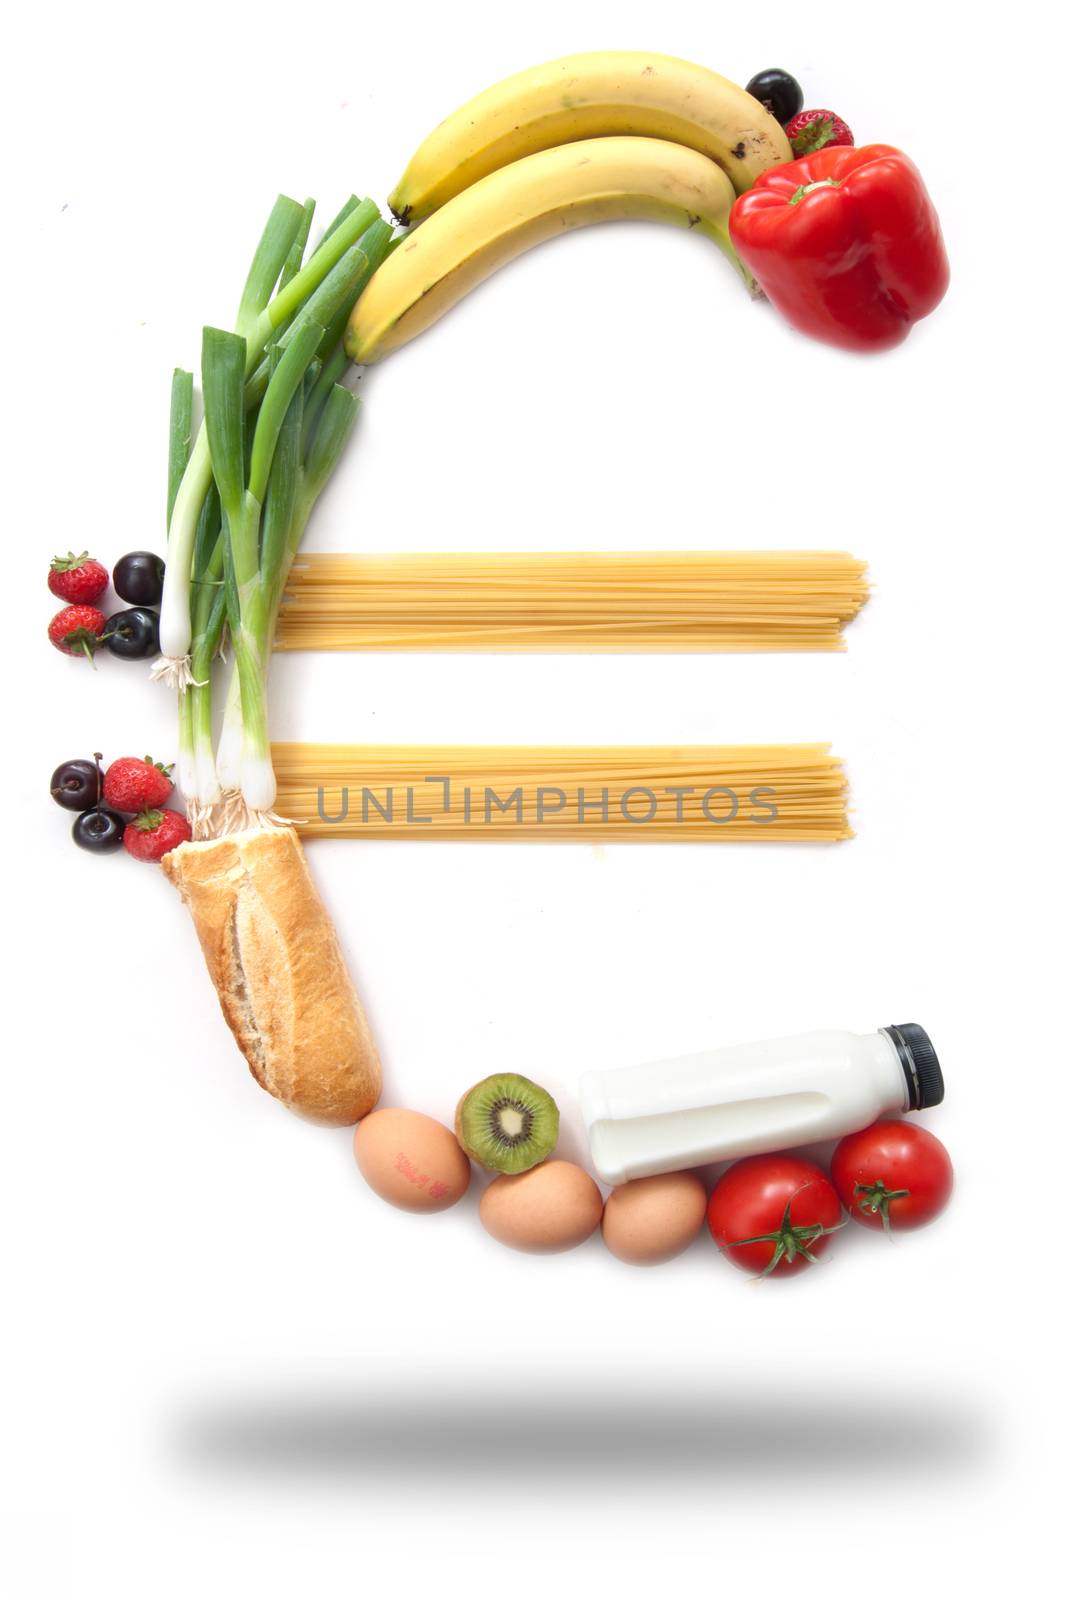 Euro currency symbol food groceries  by unikpix